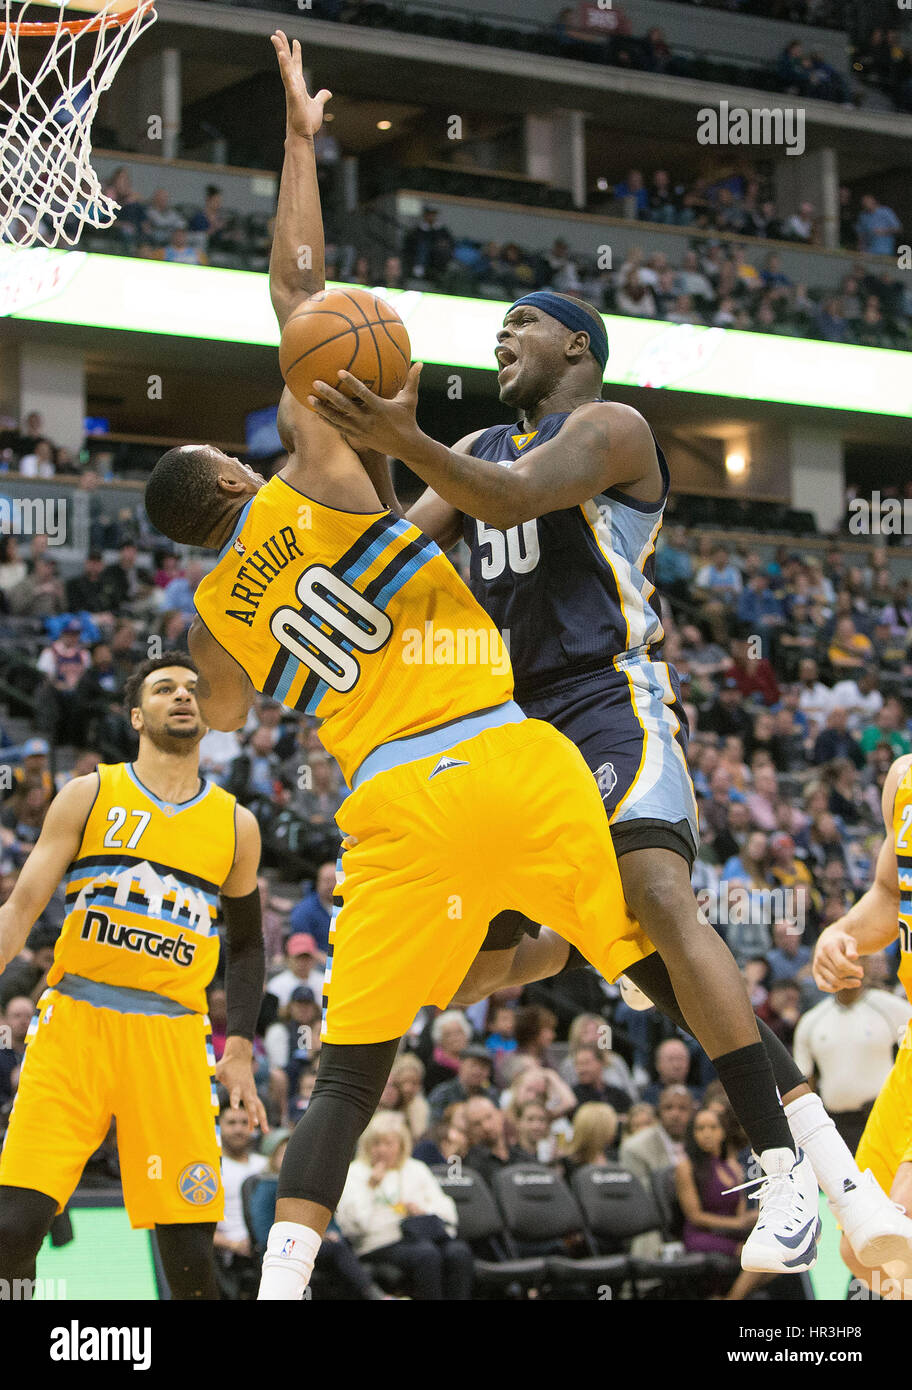 Denver, Colorado, USA. 26th Feb, 2017. Grizzlies ZACH RANDOLPH, right, drives to the basket with Nuggets DARRELL ARTHUR, left, during the 2nd. Half at the Pepsi Center Sunday afternoon. The Grizzlies beat the Nuggets 105-98. Credit: Hector Acevedo/ZUMA Wire/Alamy Live News Stock Photo